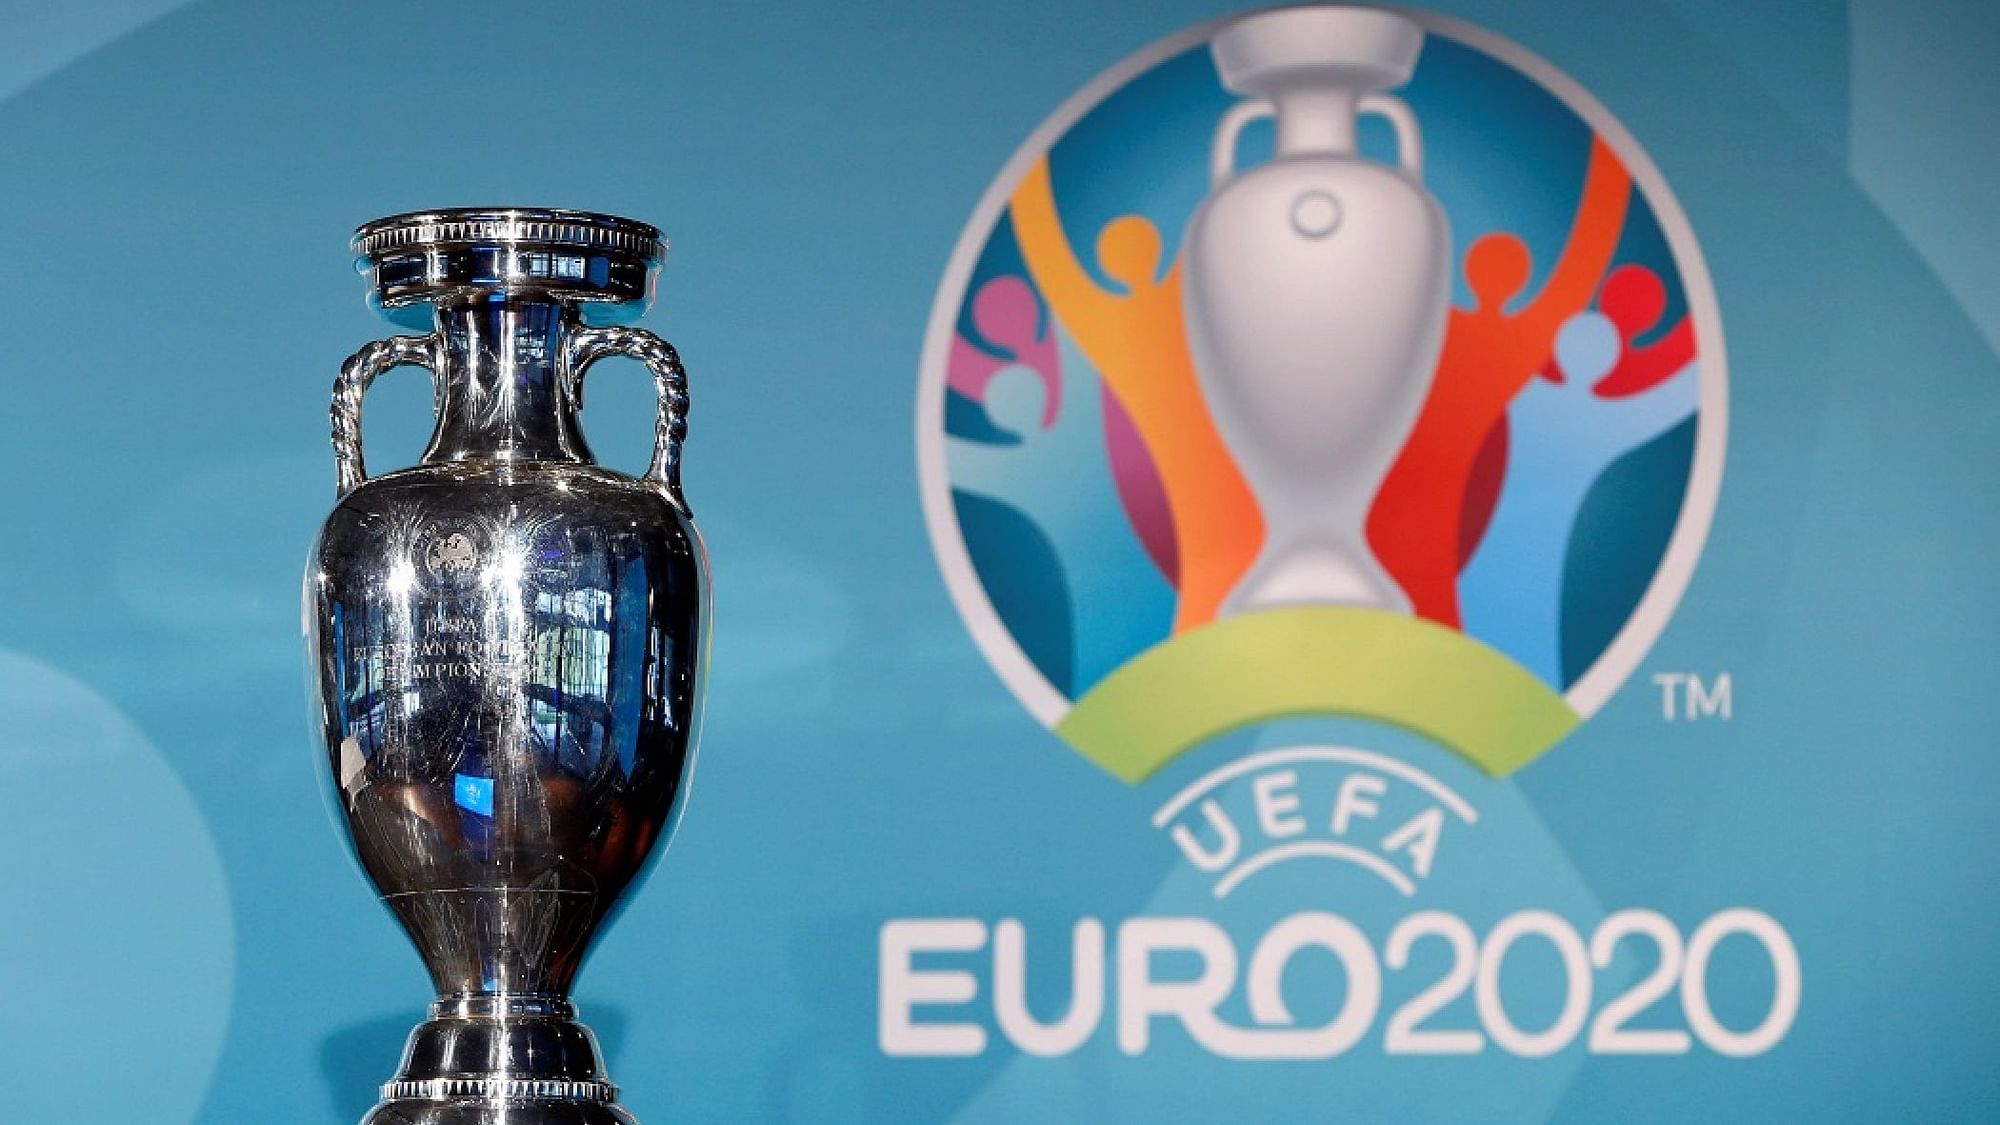 UEFA Euro 2020 tournament can be watched live on Sony sports network and Sony Liv.